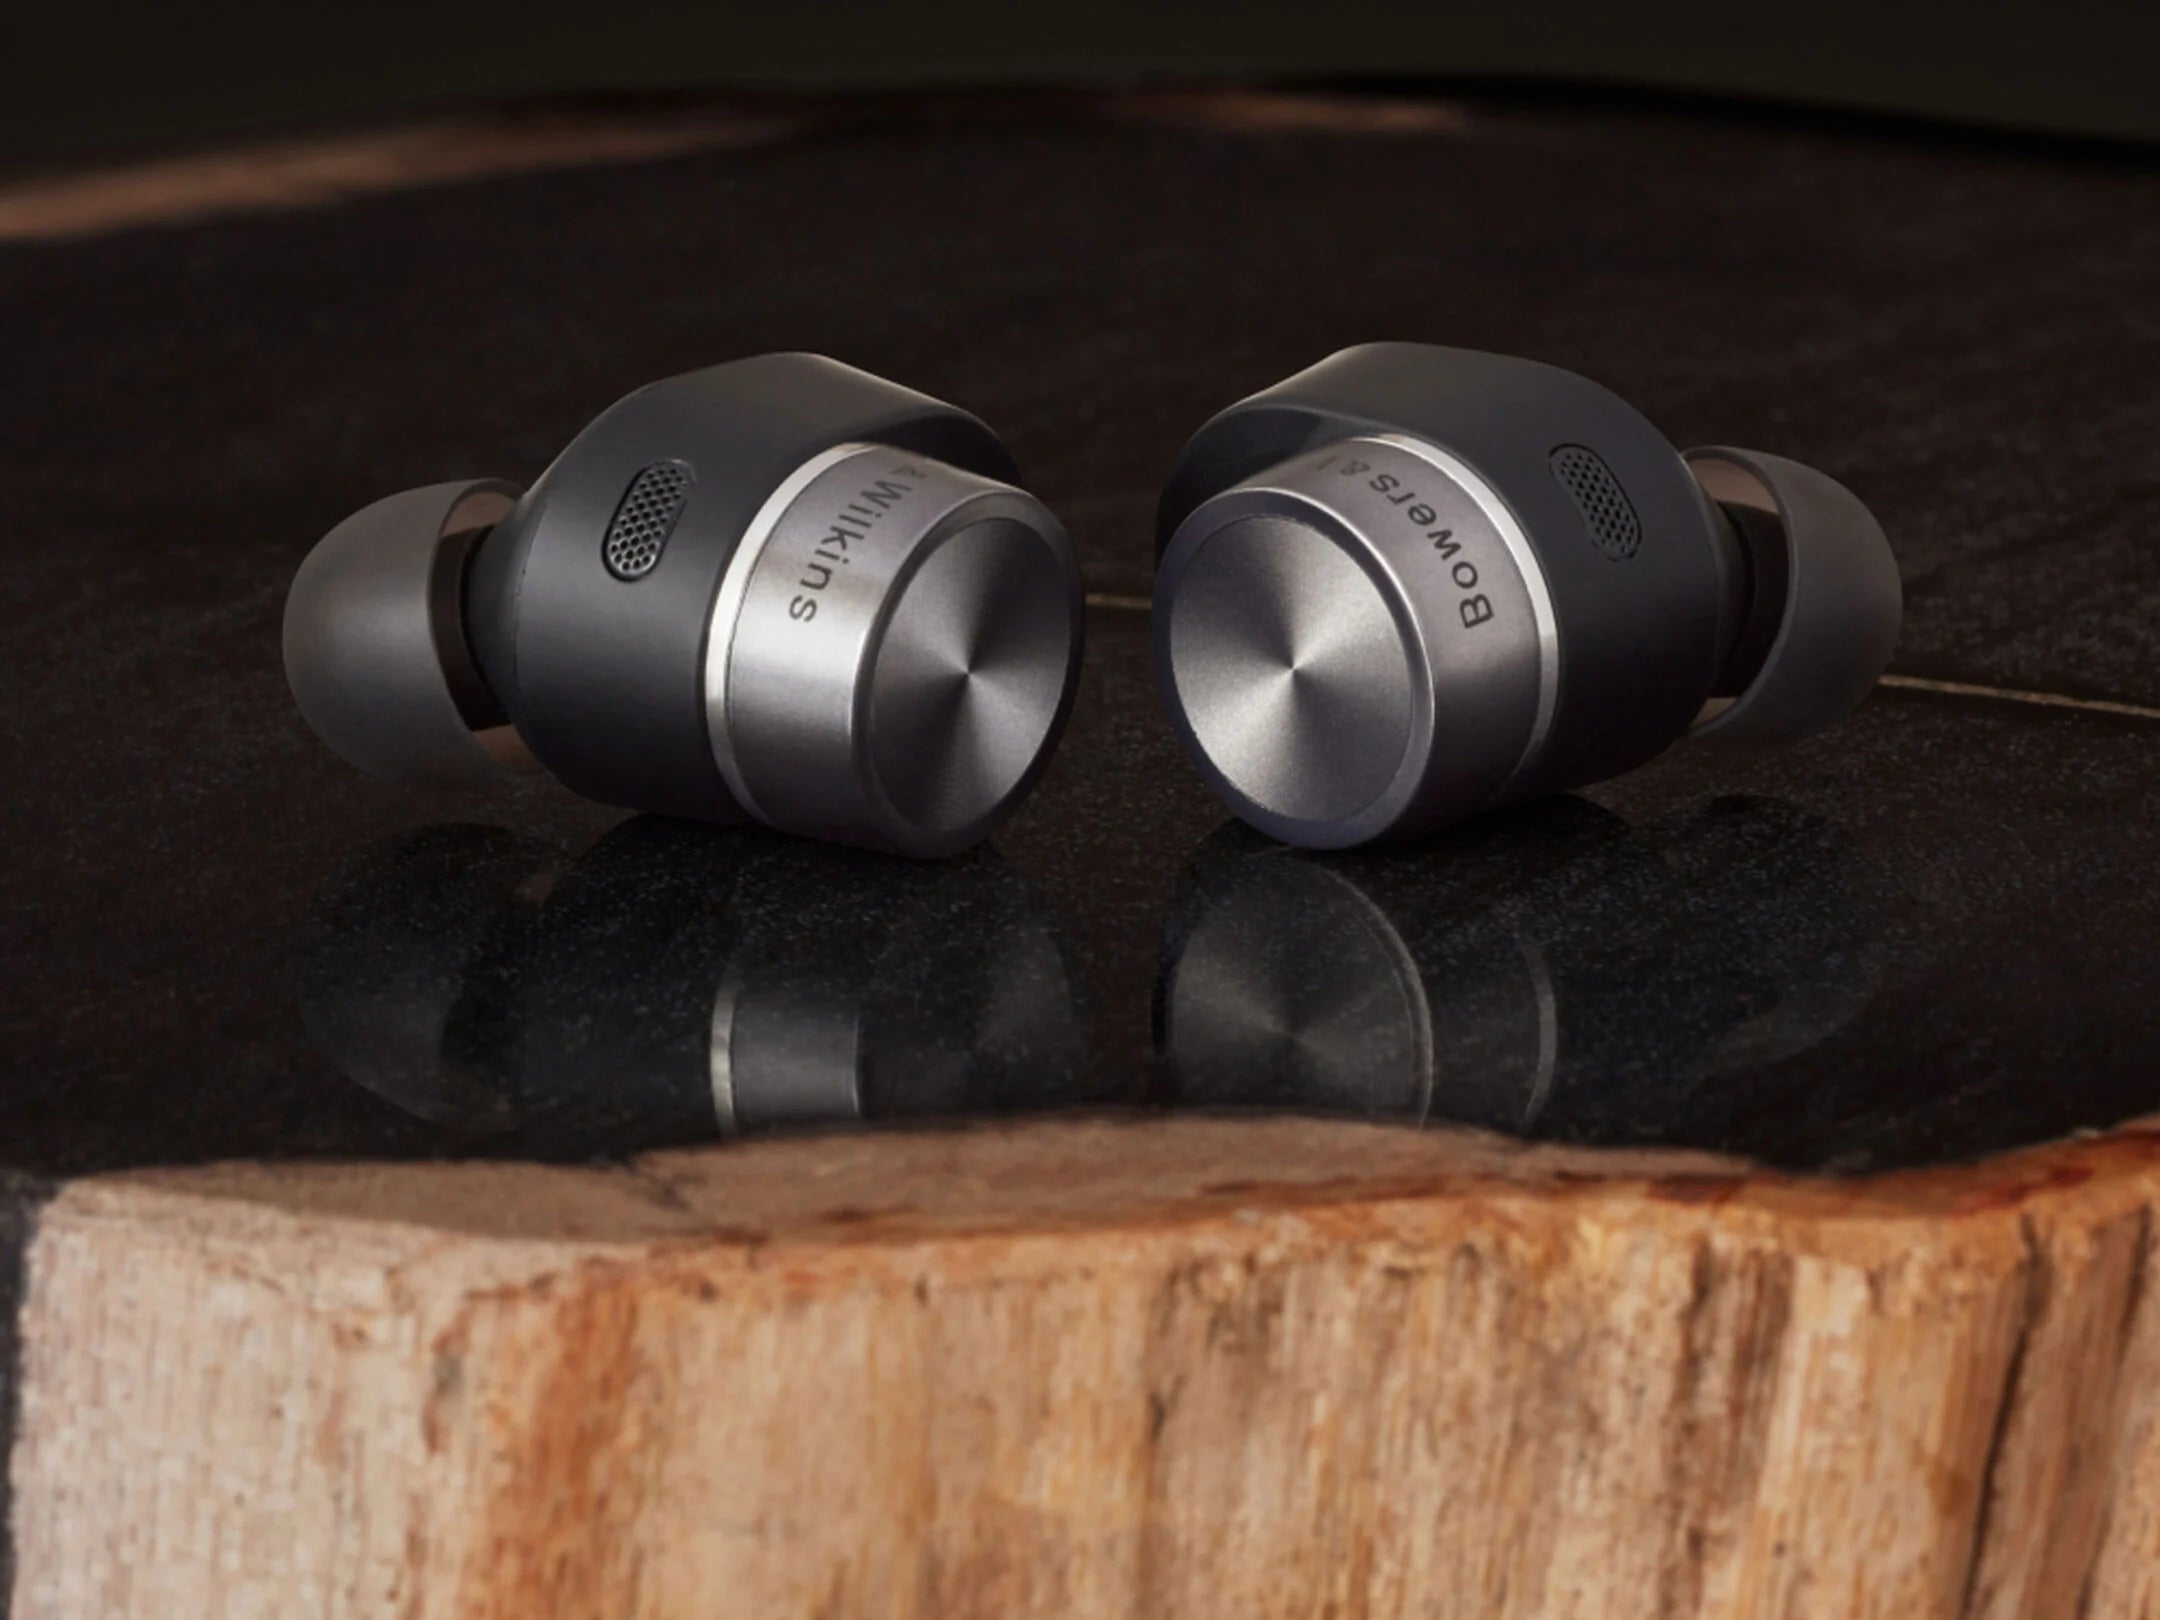 Bowers & Wilkins Pi7 S2 earbuds